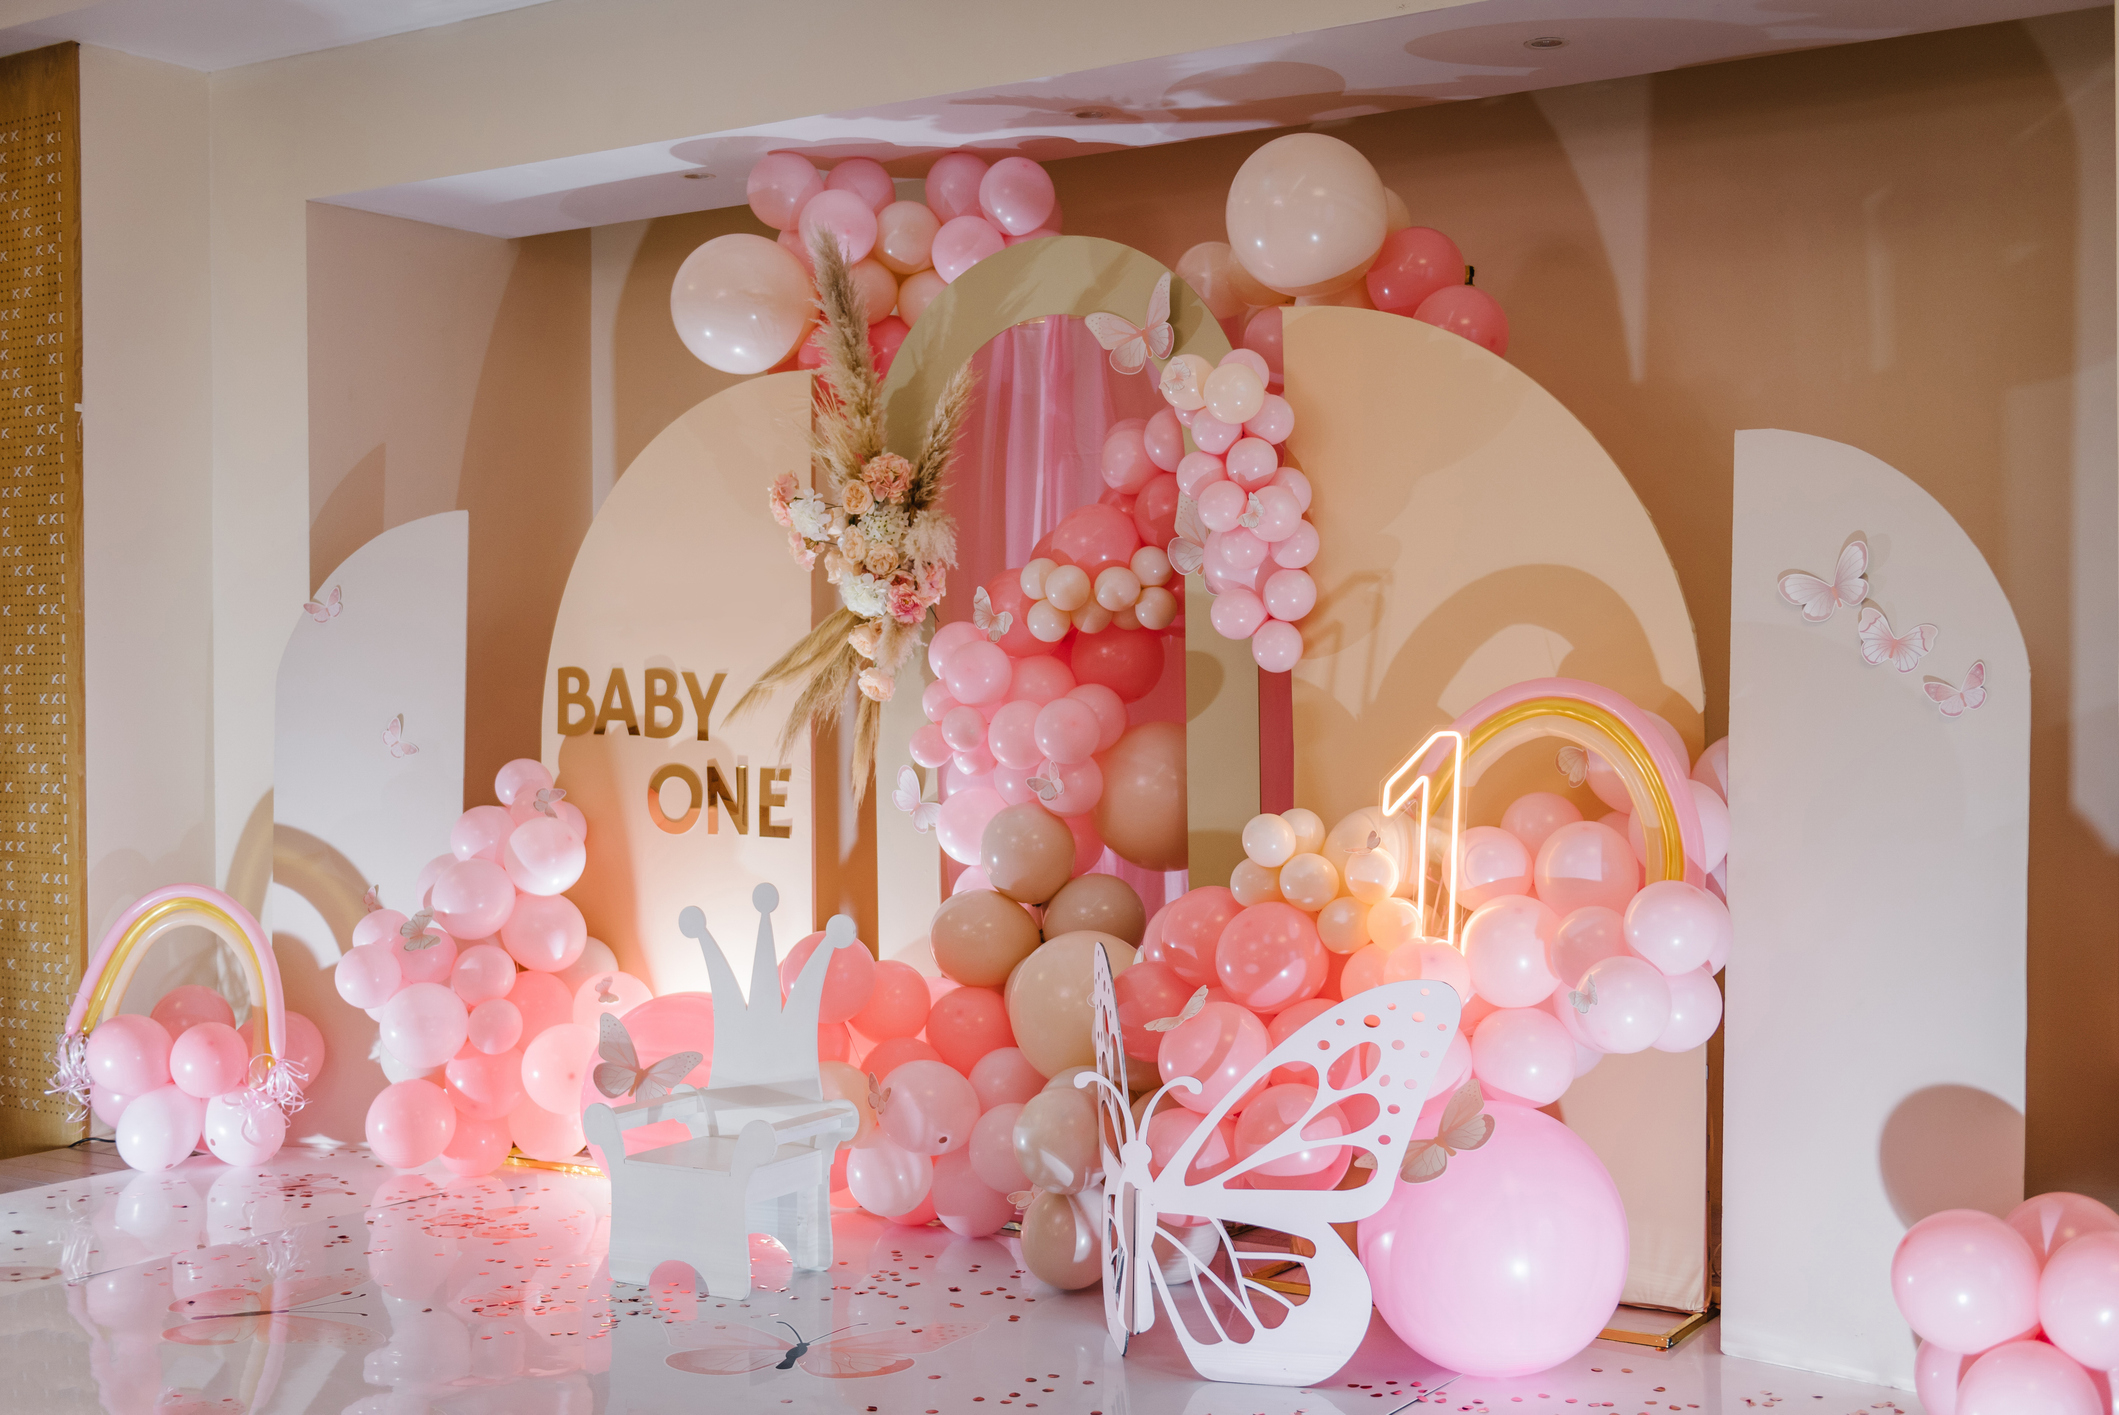 A baby shower decor with balloons, butterfly, and &quot;BABY&quot; sign, no people visible